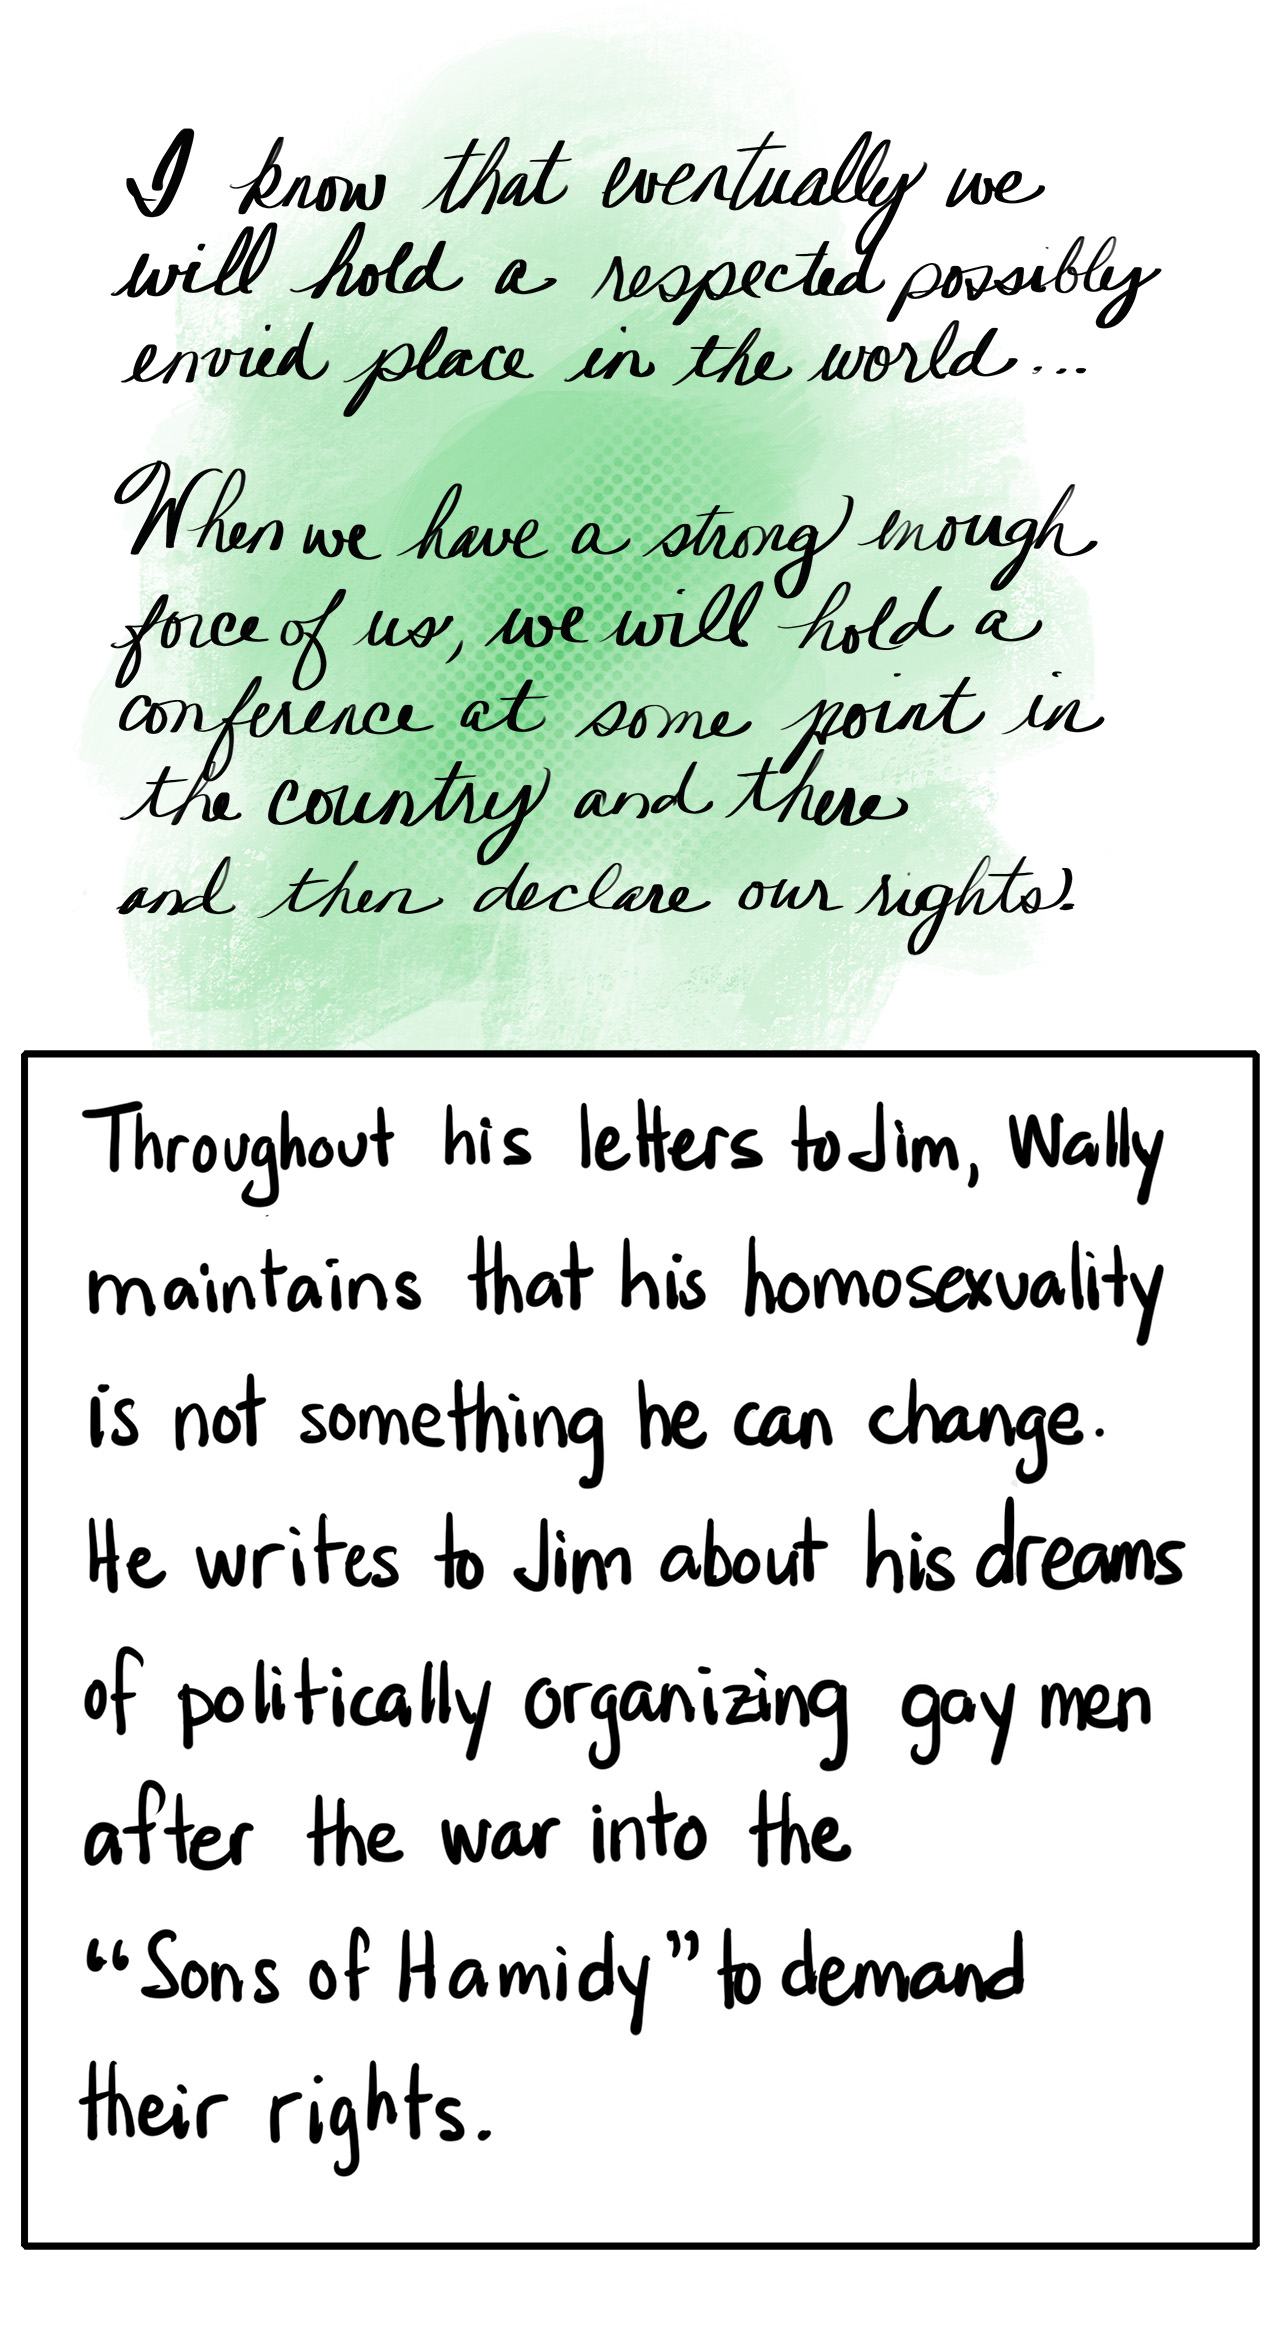 Image of Letter: “I know that eventually we will hold a respected, possibly envied place in the world … when we have a strong enough force of us, we will hold a conference at some point in the country and there island then declare our rights.” Text: Throughout his letters to Jim, Wally maintains that his homosexuality is not something he can change. He writes to Jim about his dreams of politically organizing gay men after the war into the “Sons of Hamidy” to demand their rights.